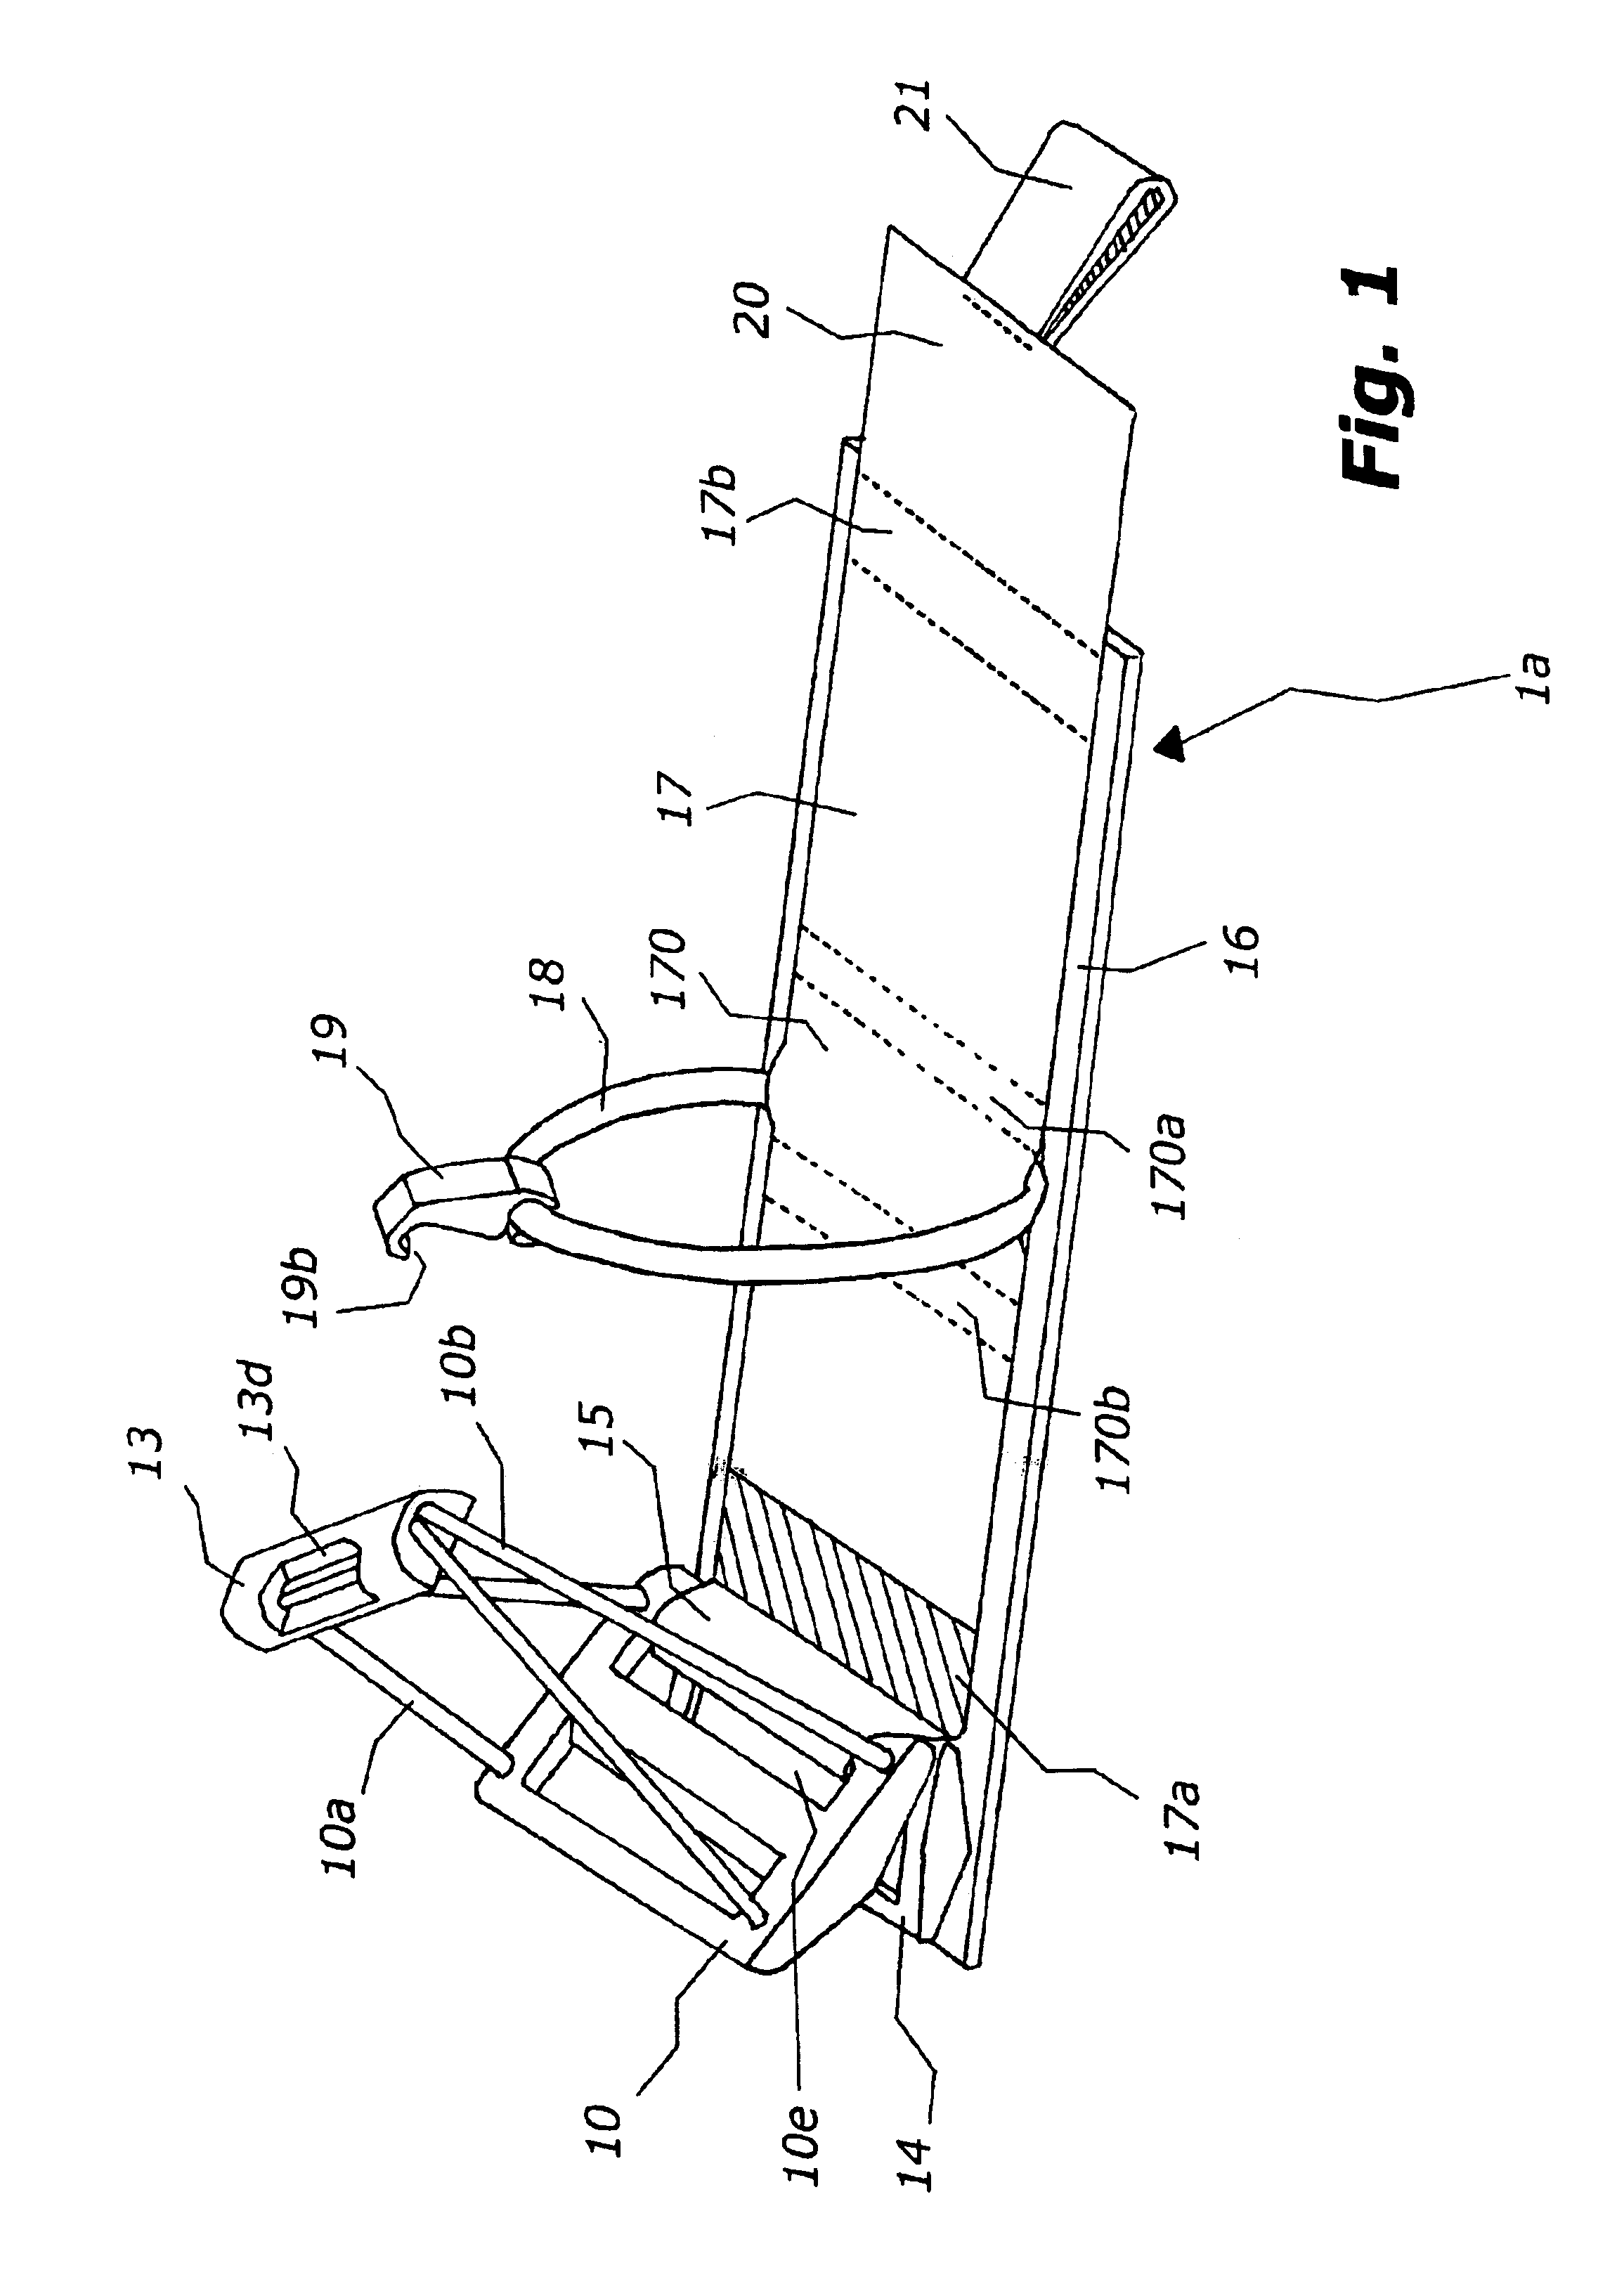 Harness system for attaching camera to user